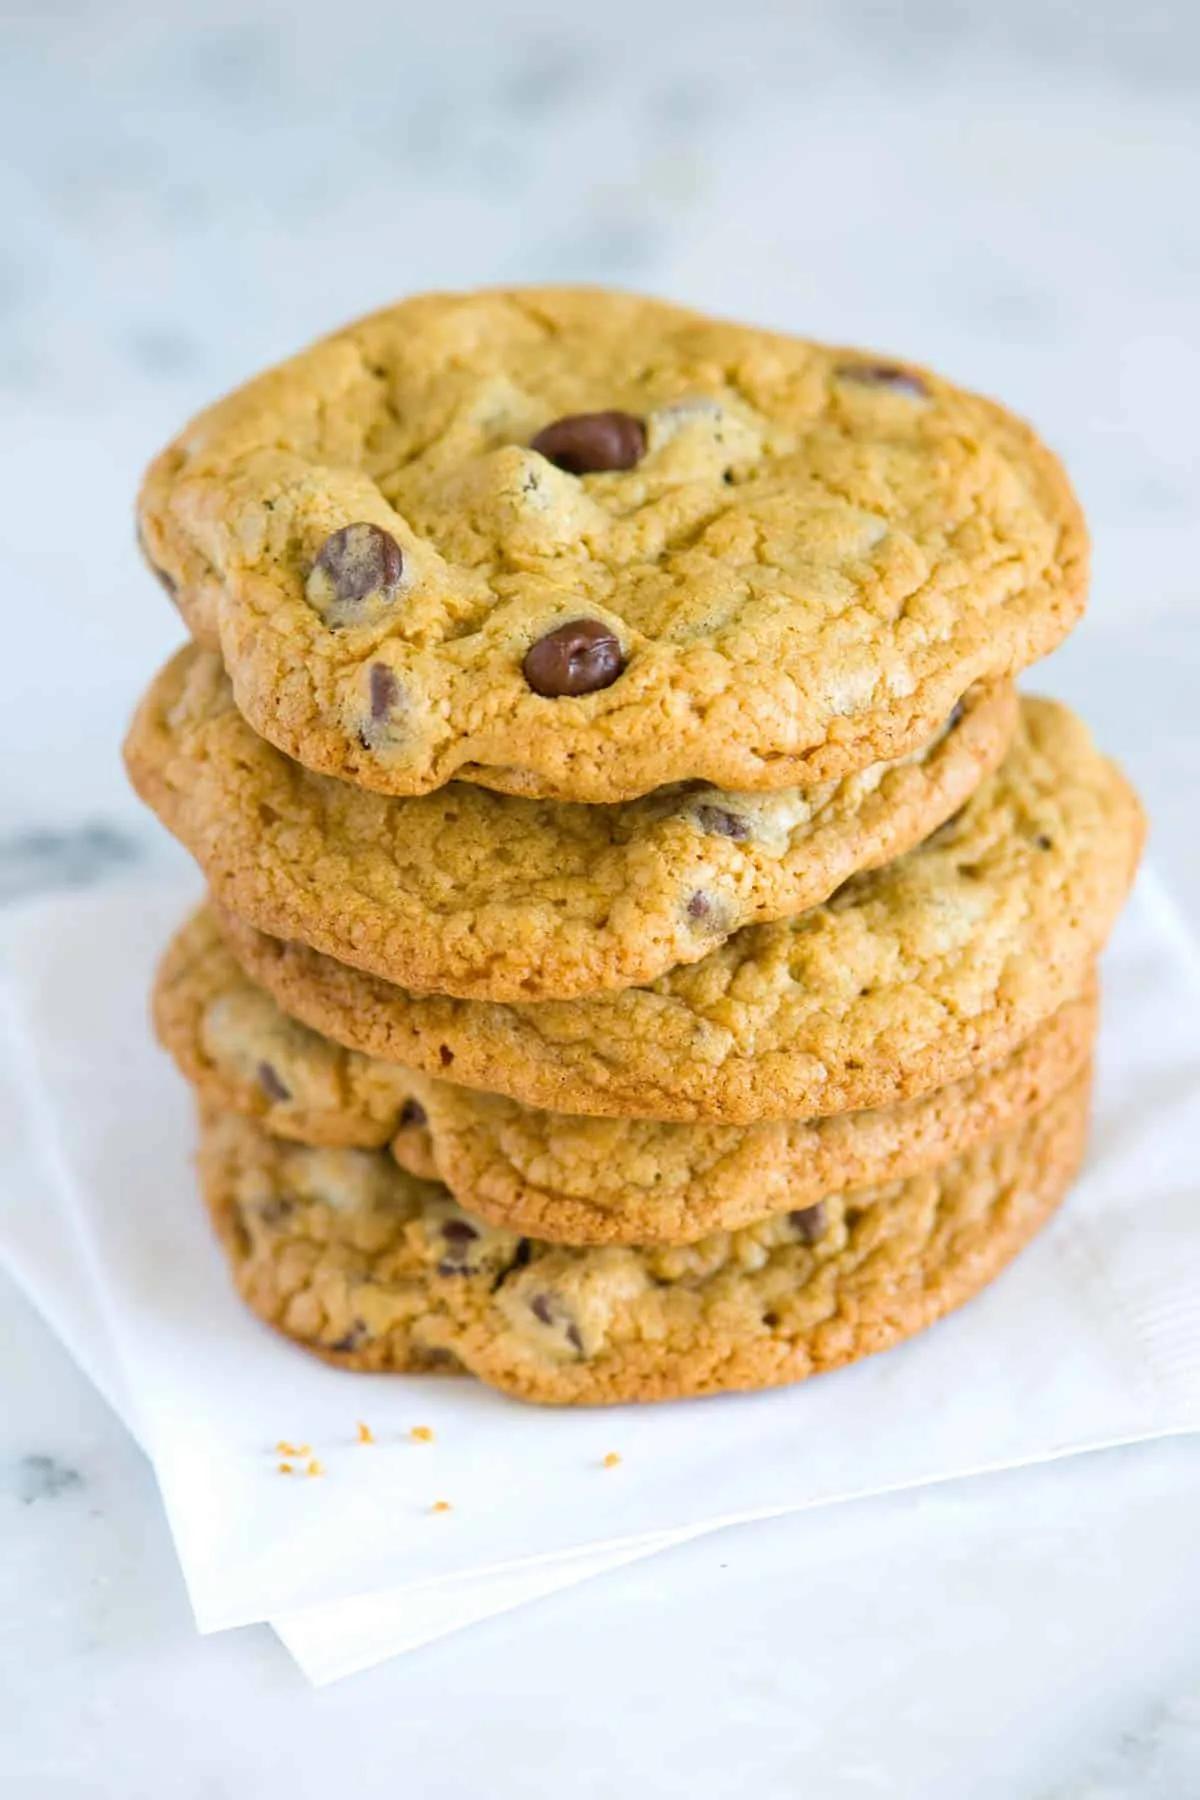 How to Make The Best Homemade Chocolate Chip Cookies